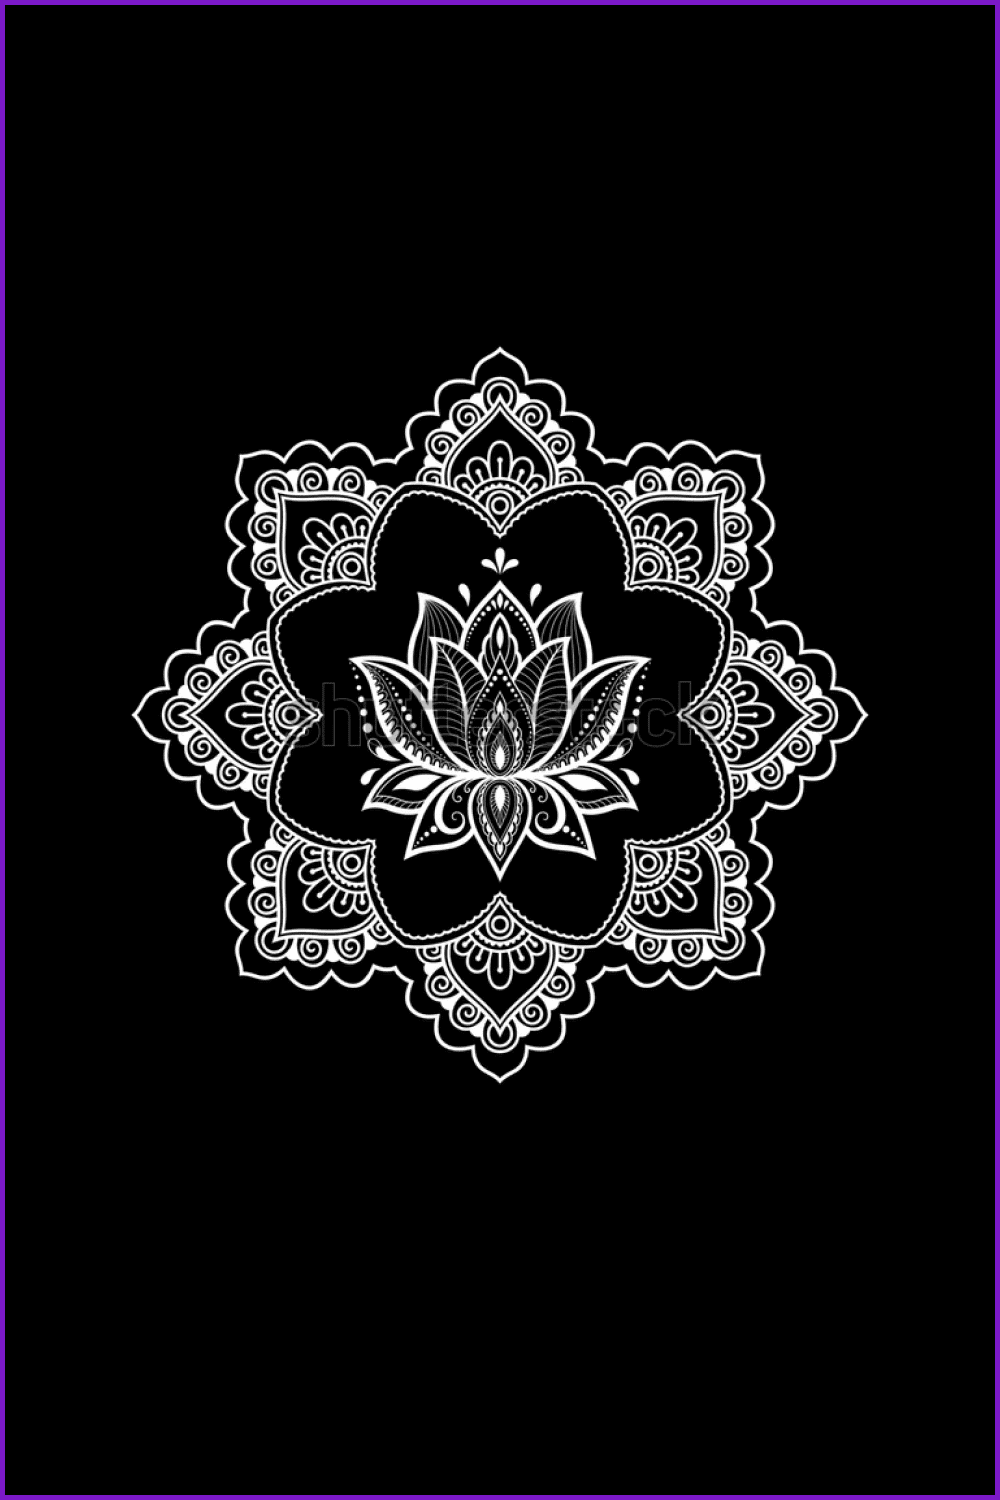 A very interesting mandala with a lotus flower inside.